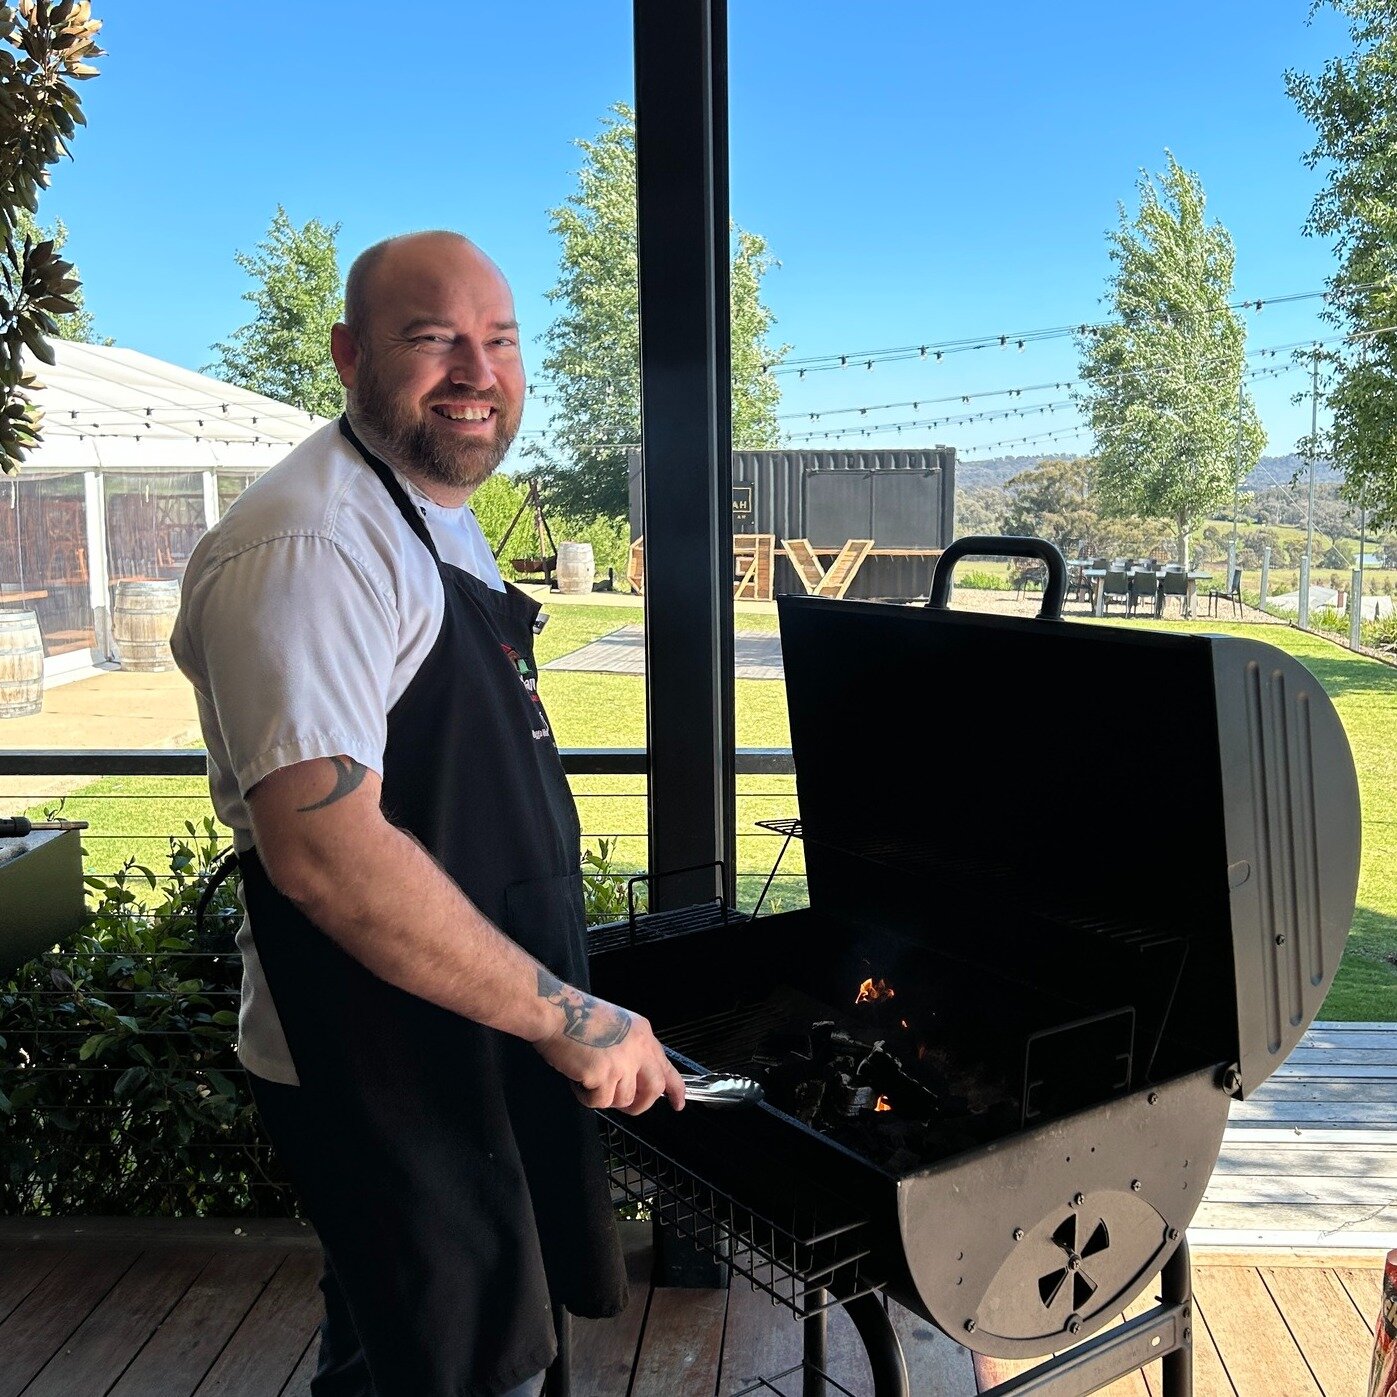 Shep in one of his favourite places, at the BBQ!
Have you checked out Shep's @mr.lawrencewagga cafe and @hidewagga Restaurant?

#foodiam #foodies #waggafoodies #wagga #waggawagga #riverina #visitwagga #hidewagga #waggafood #steakhouse #cafe